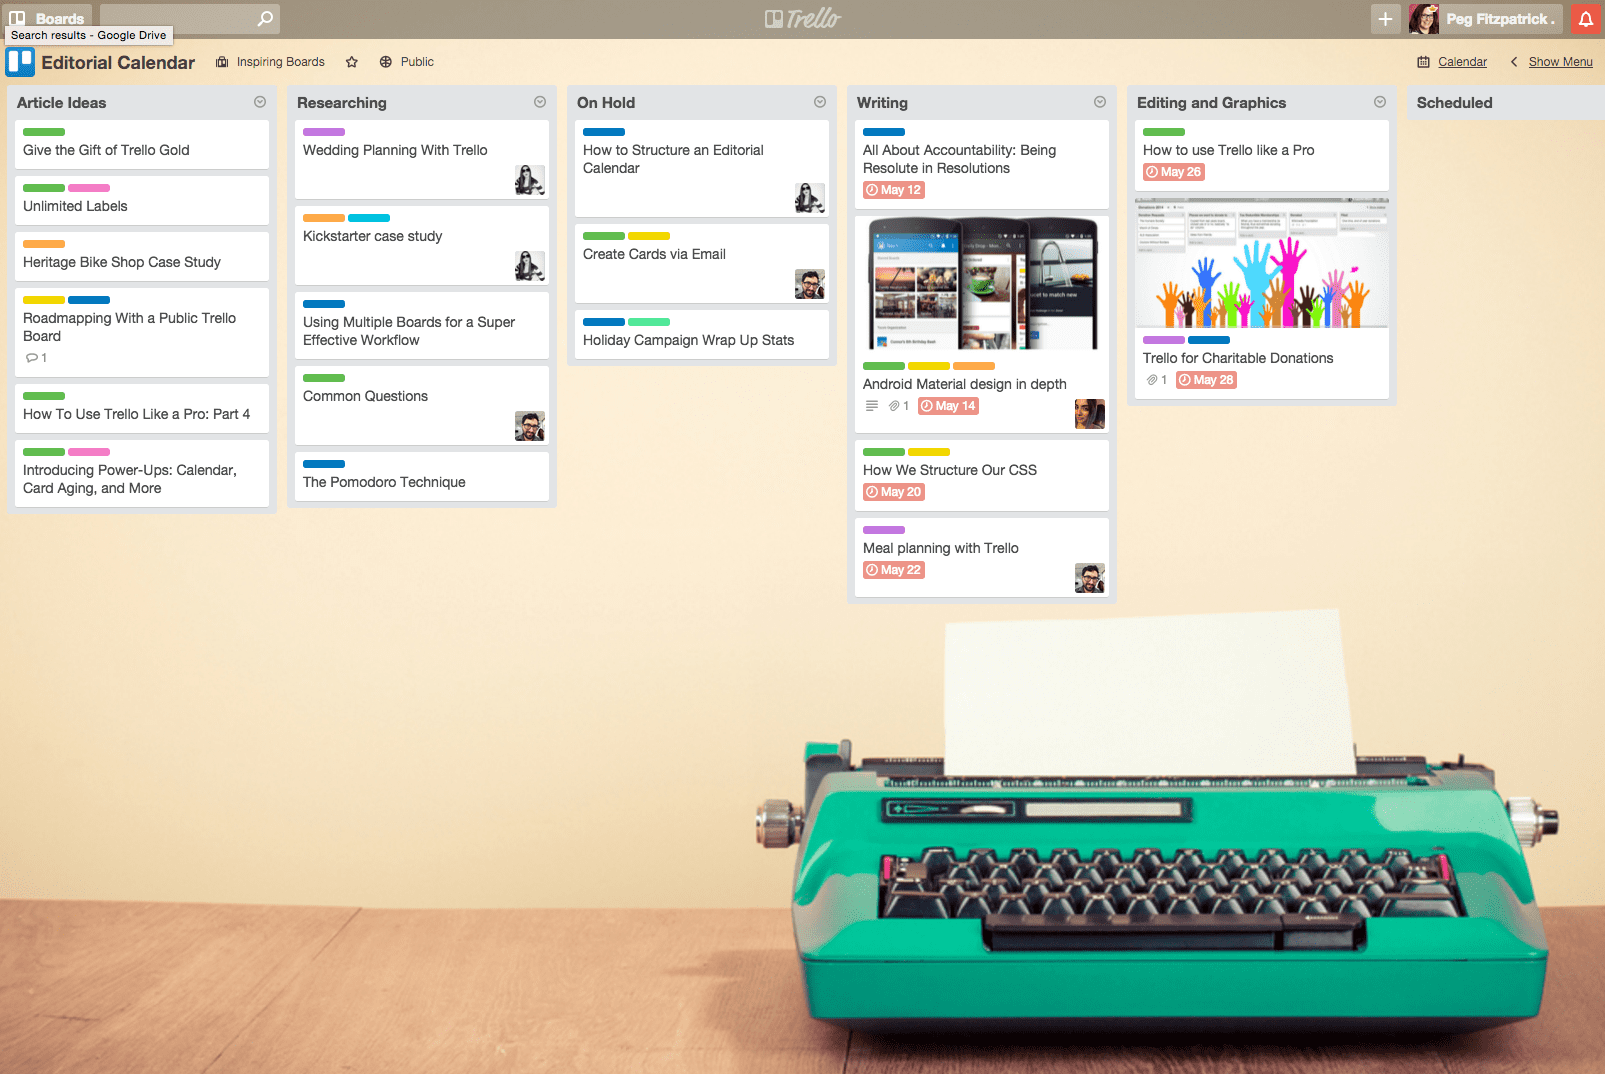 Trello cards on the wall the perfect free social media tool